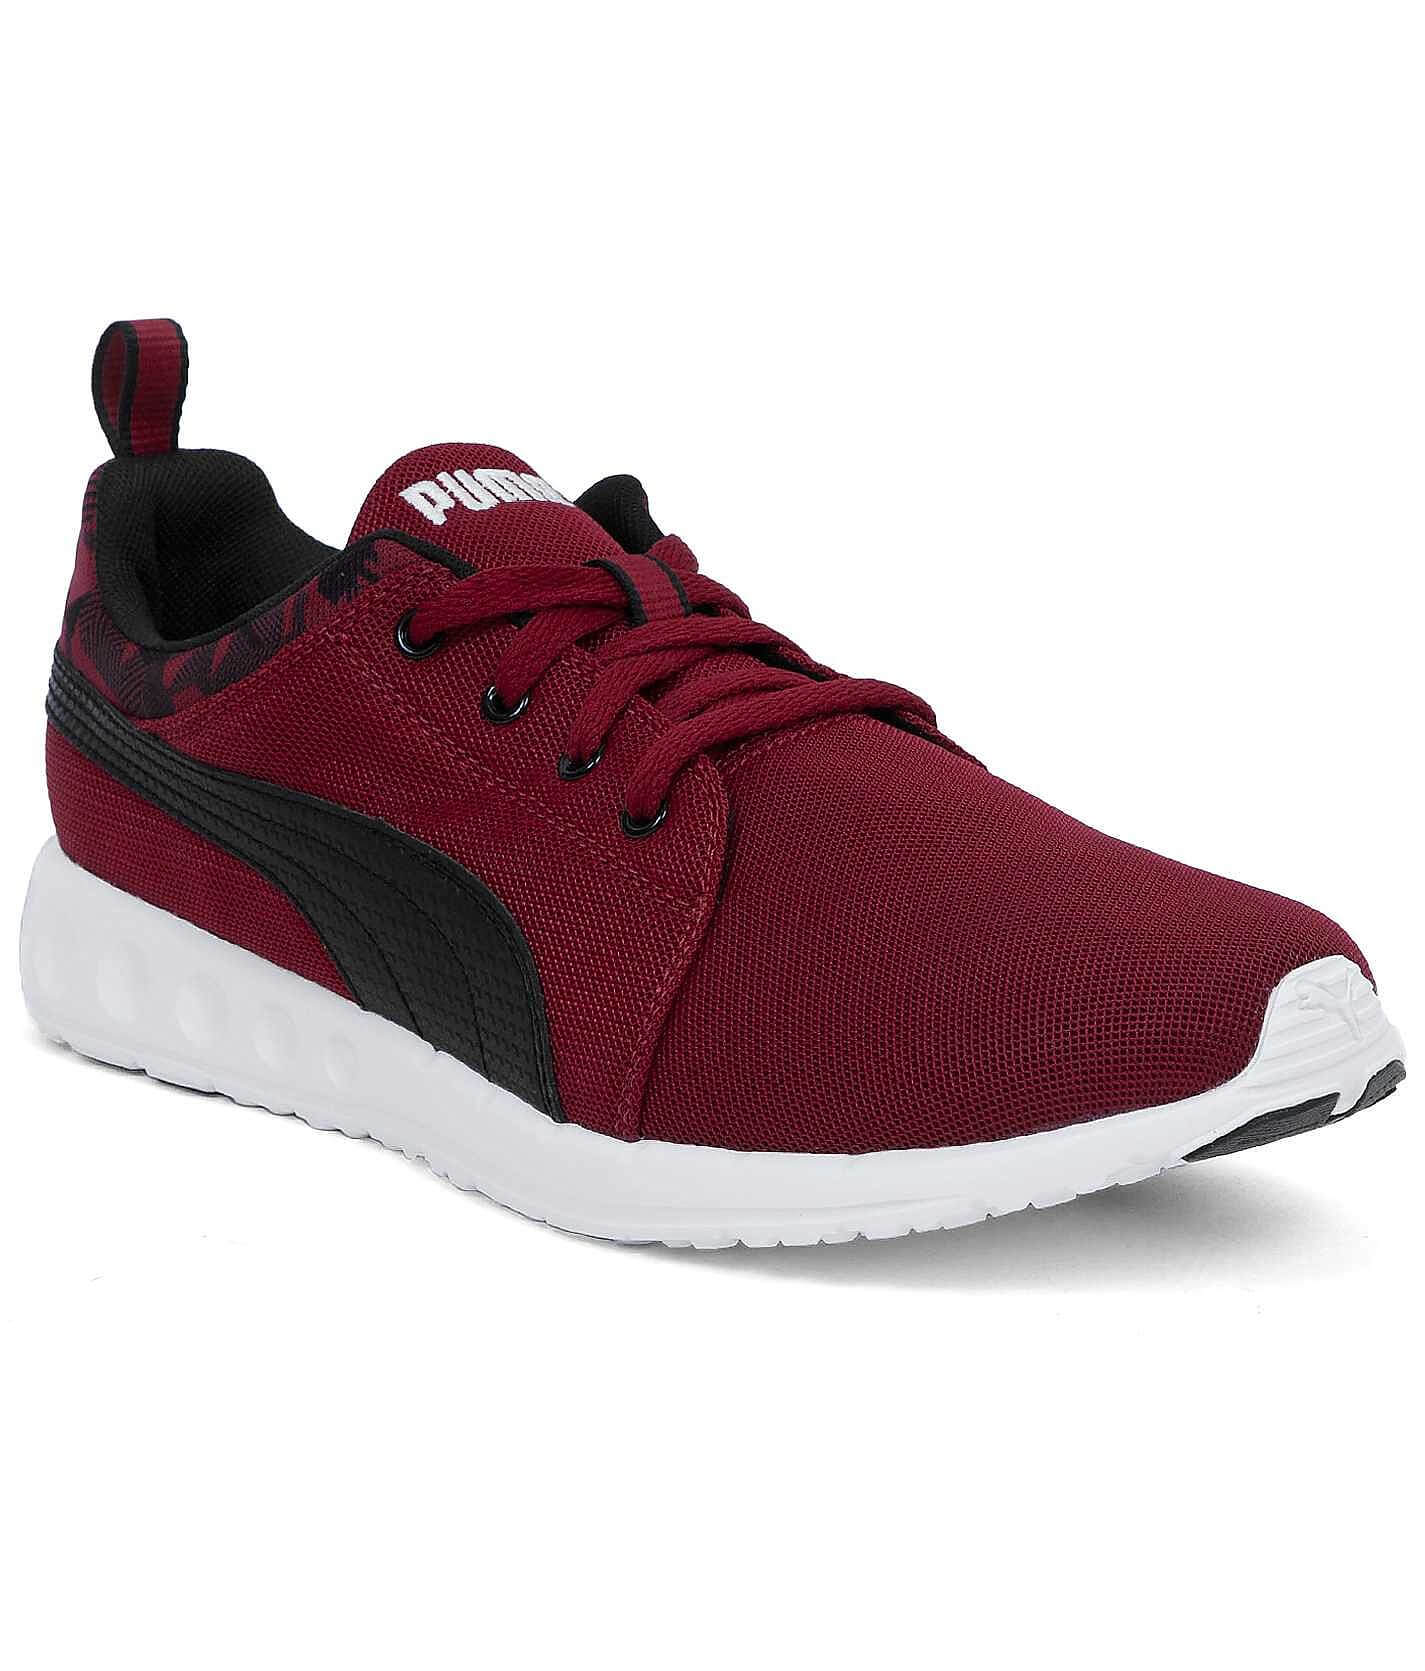 Puma Carson Runner Shoe - Shoes in Red | Buckle